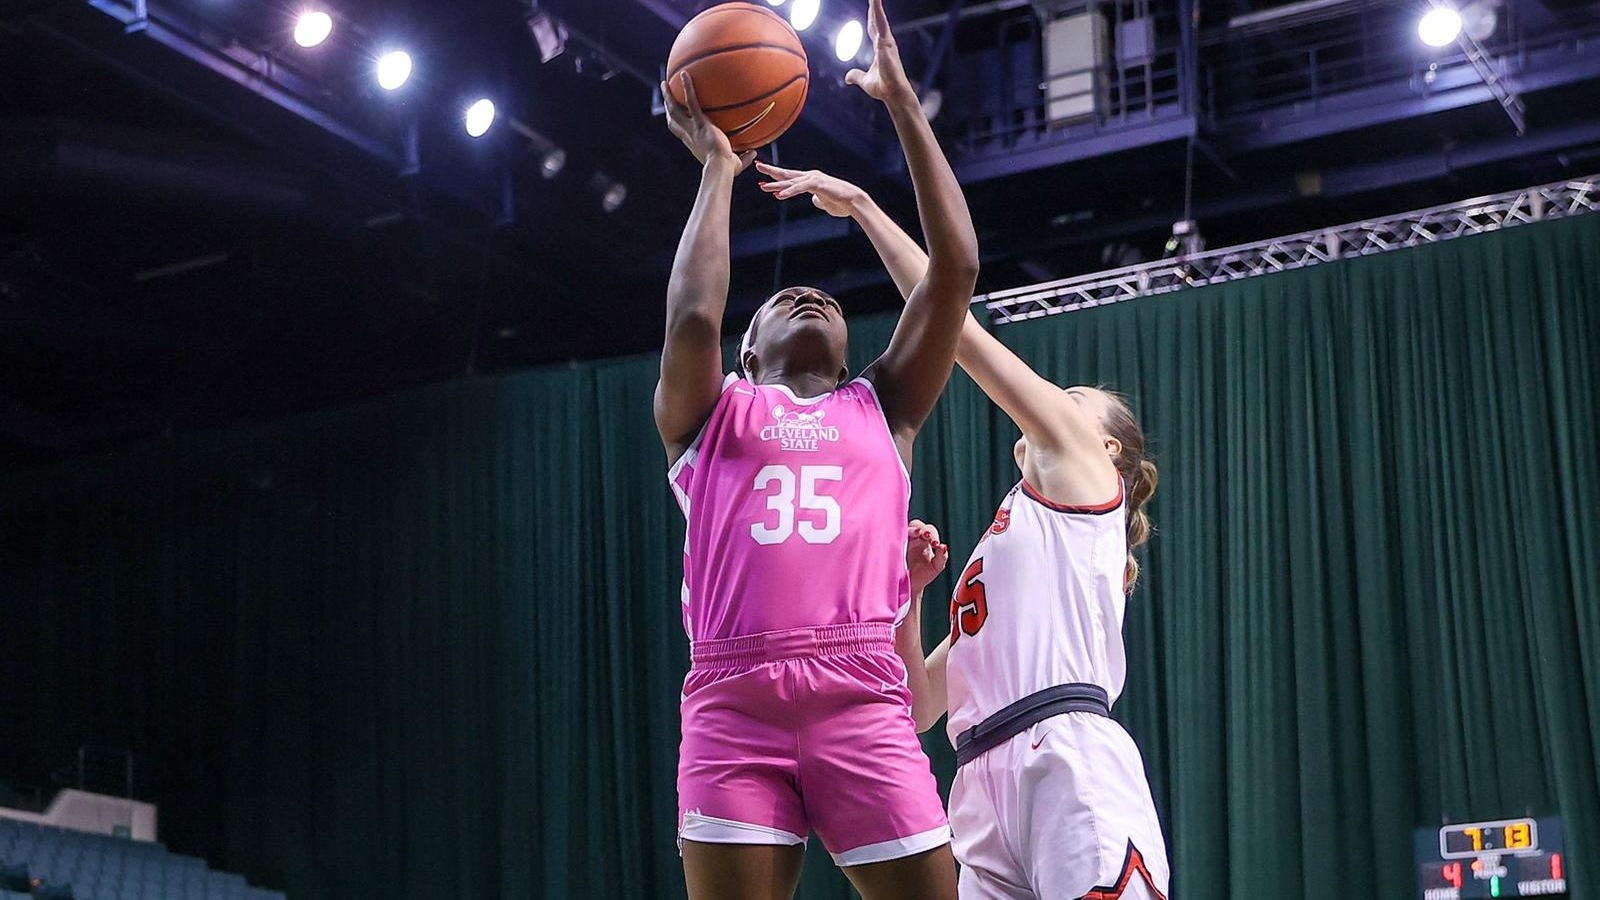 Cleveland State Women’s Basketball Earns 81-48 Victory Over YSU